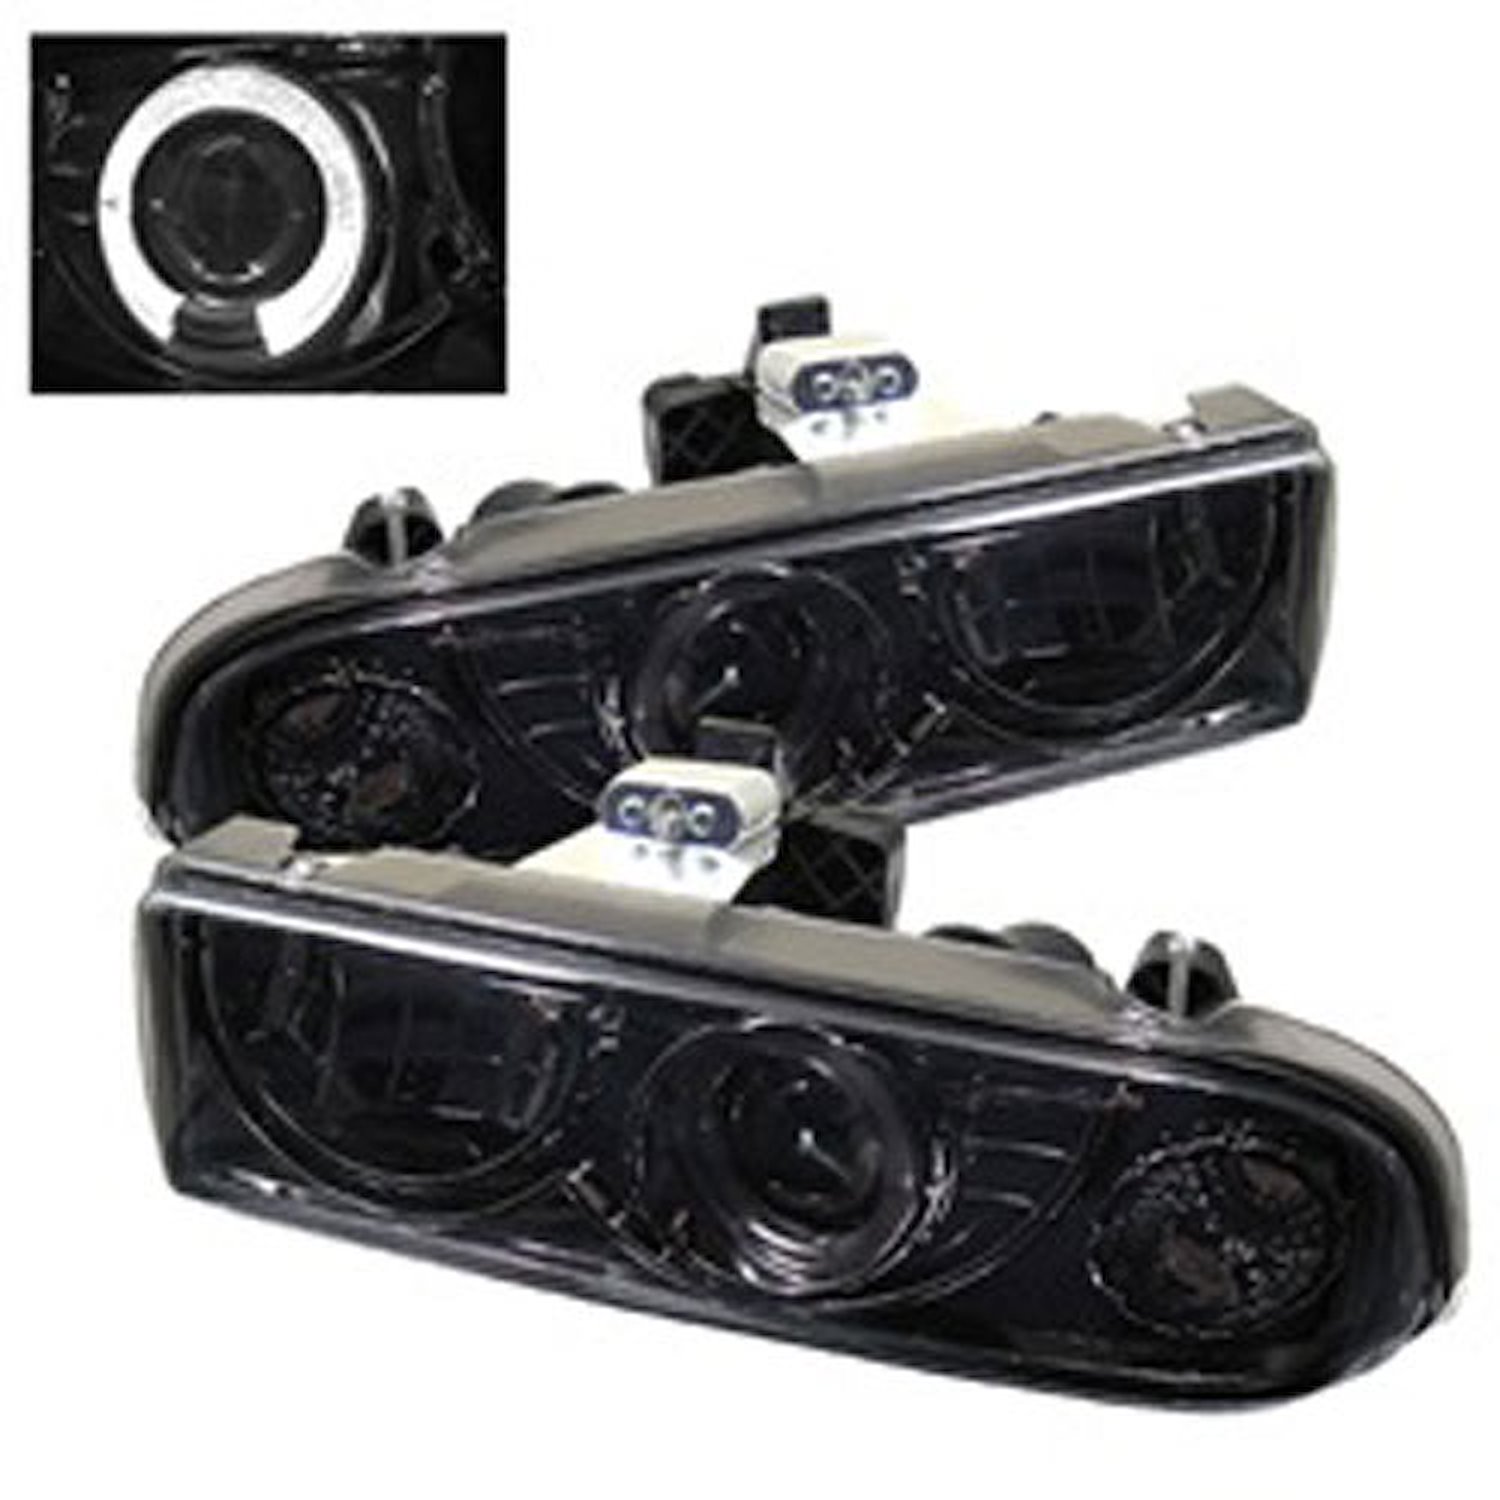 Halo LED Projector Headlights 1998-2004 Chevy S10